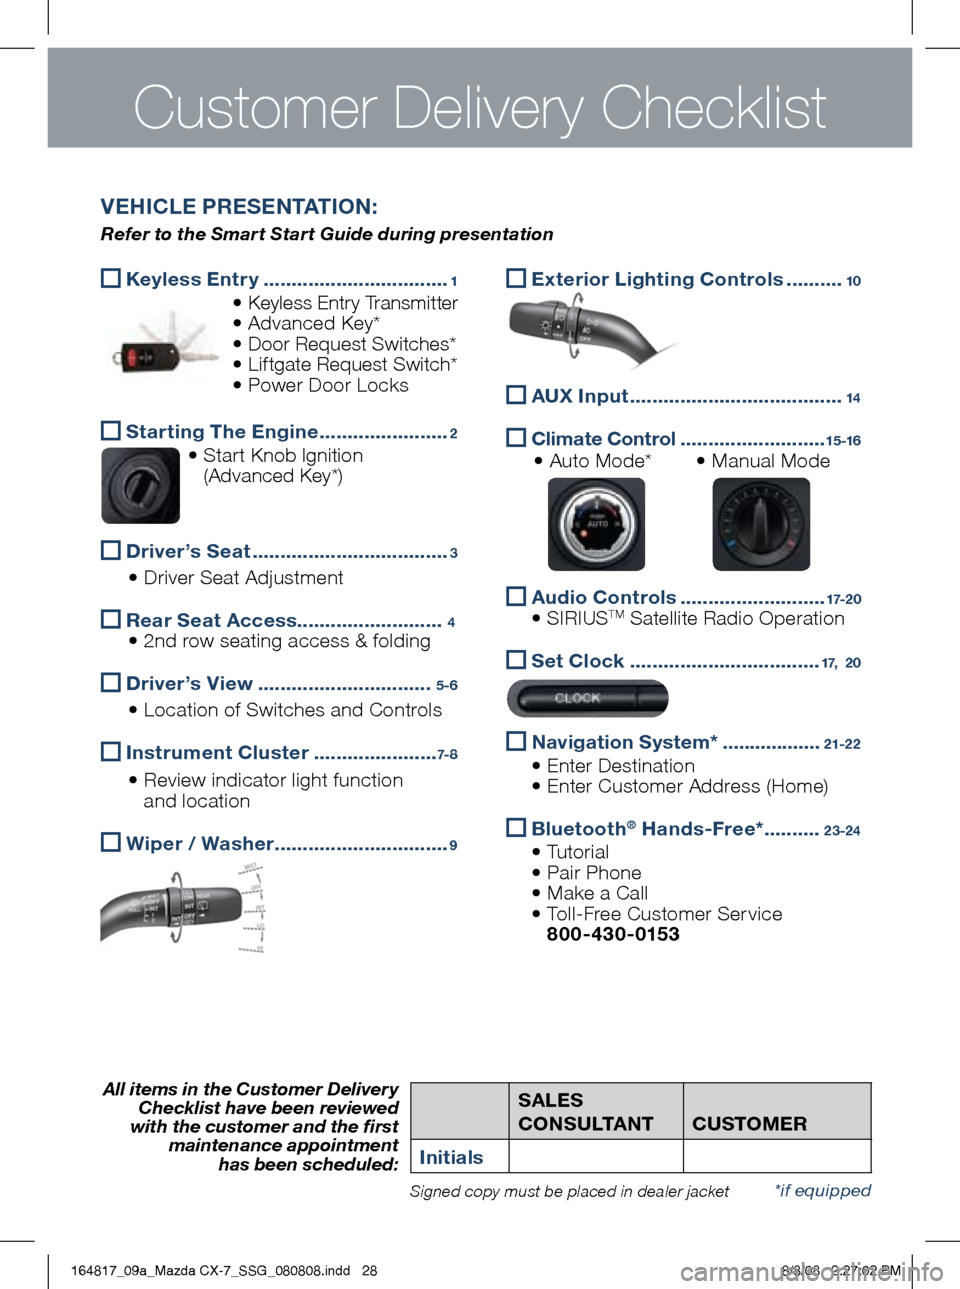 MAZDA MODEL CX-7 2009  Smart Start Guide (in English) SALES  
CONSULTANT  
CUSTOm
ER
initialsAll items in the Customer Delivery  Checklist have been reviewed   
with the customer and the first  maintenance appointment   
has been scheduled:
*if equippedS